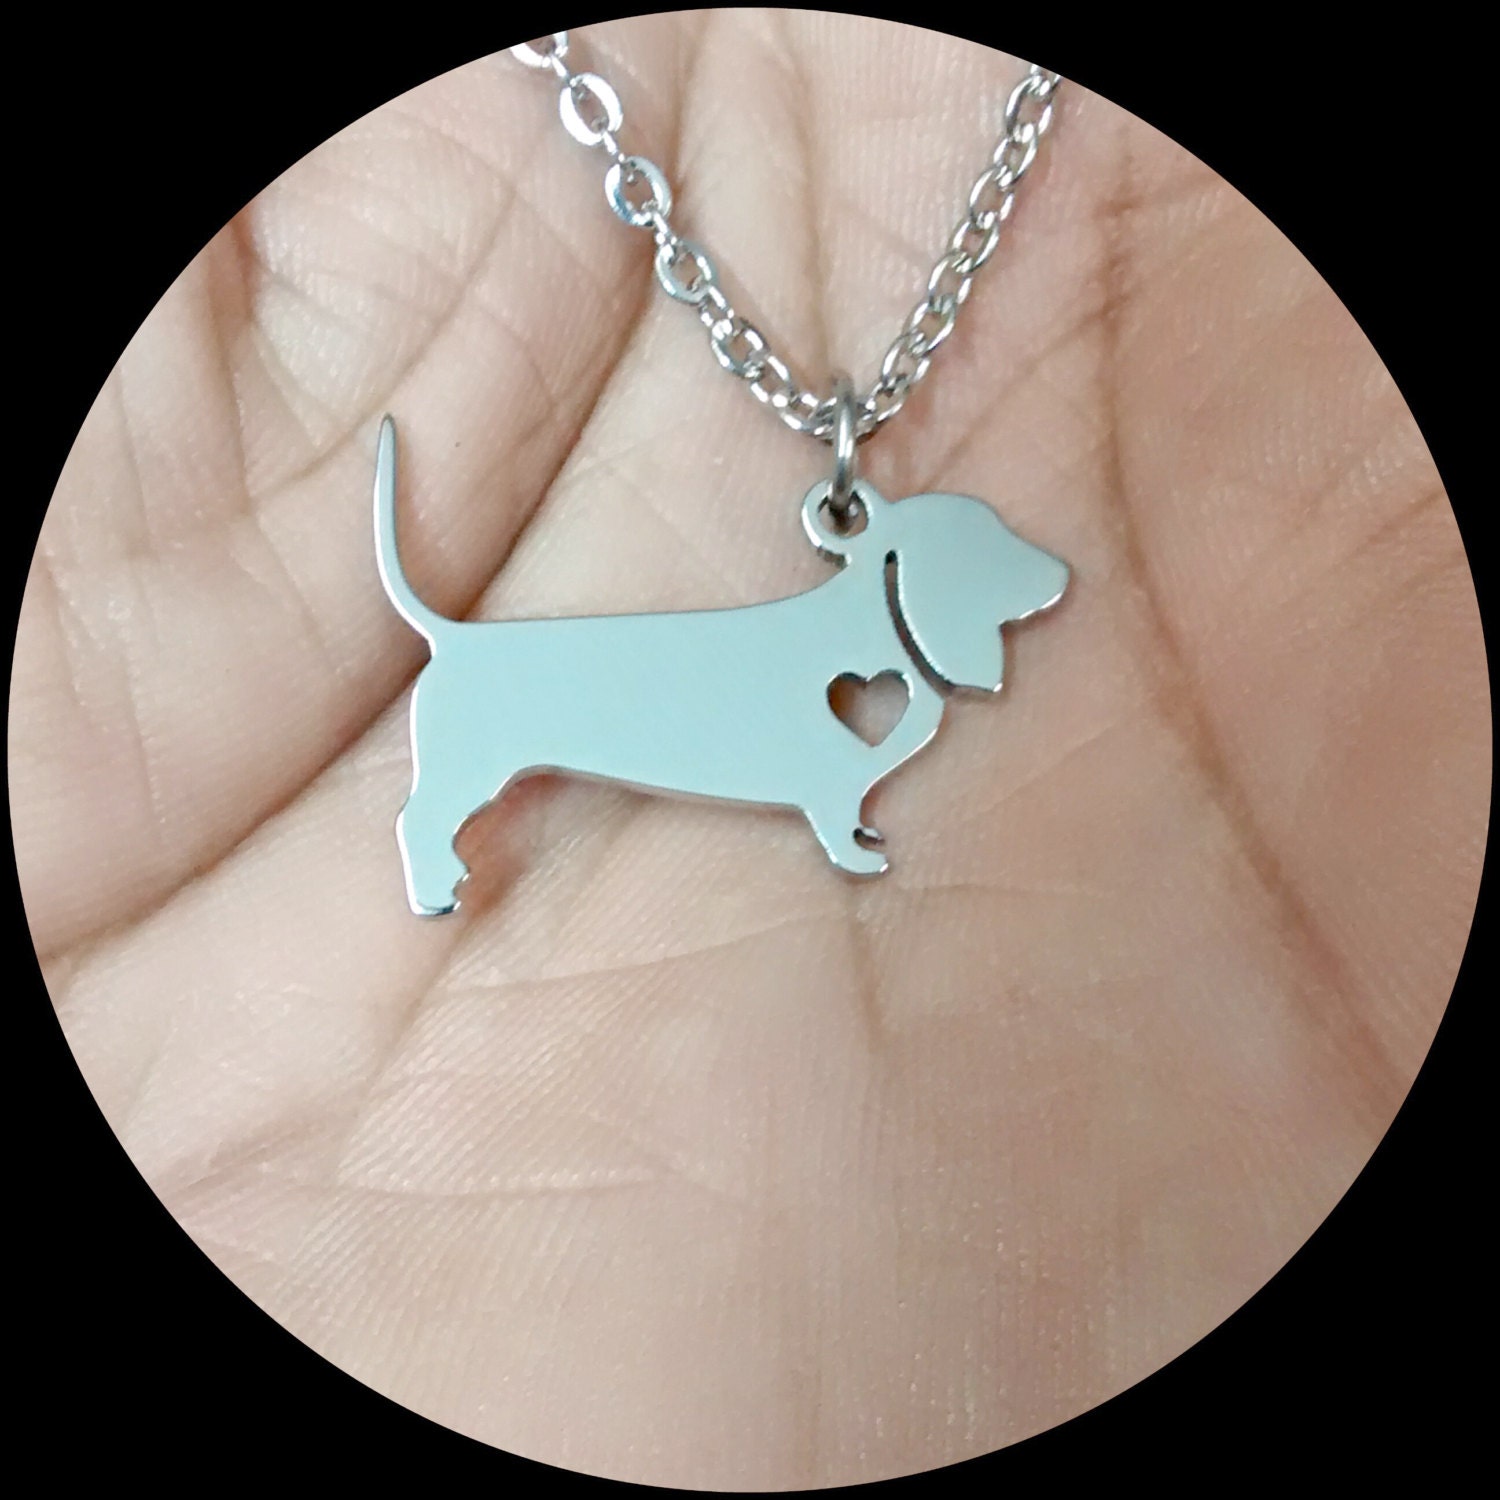 Basset Hound Necklace Rose Gold Sterling Silver Jewelry Dog Engrave Gold 